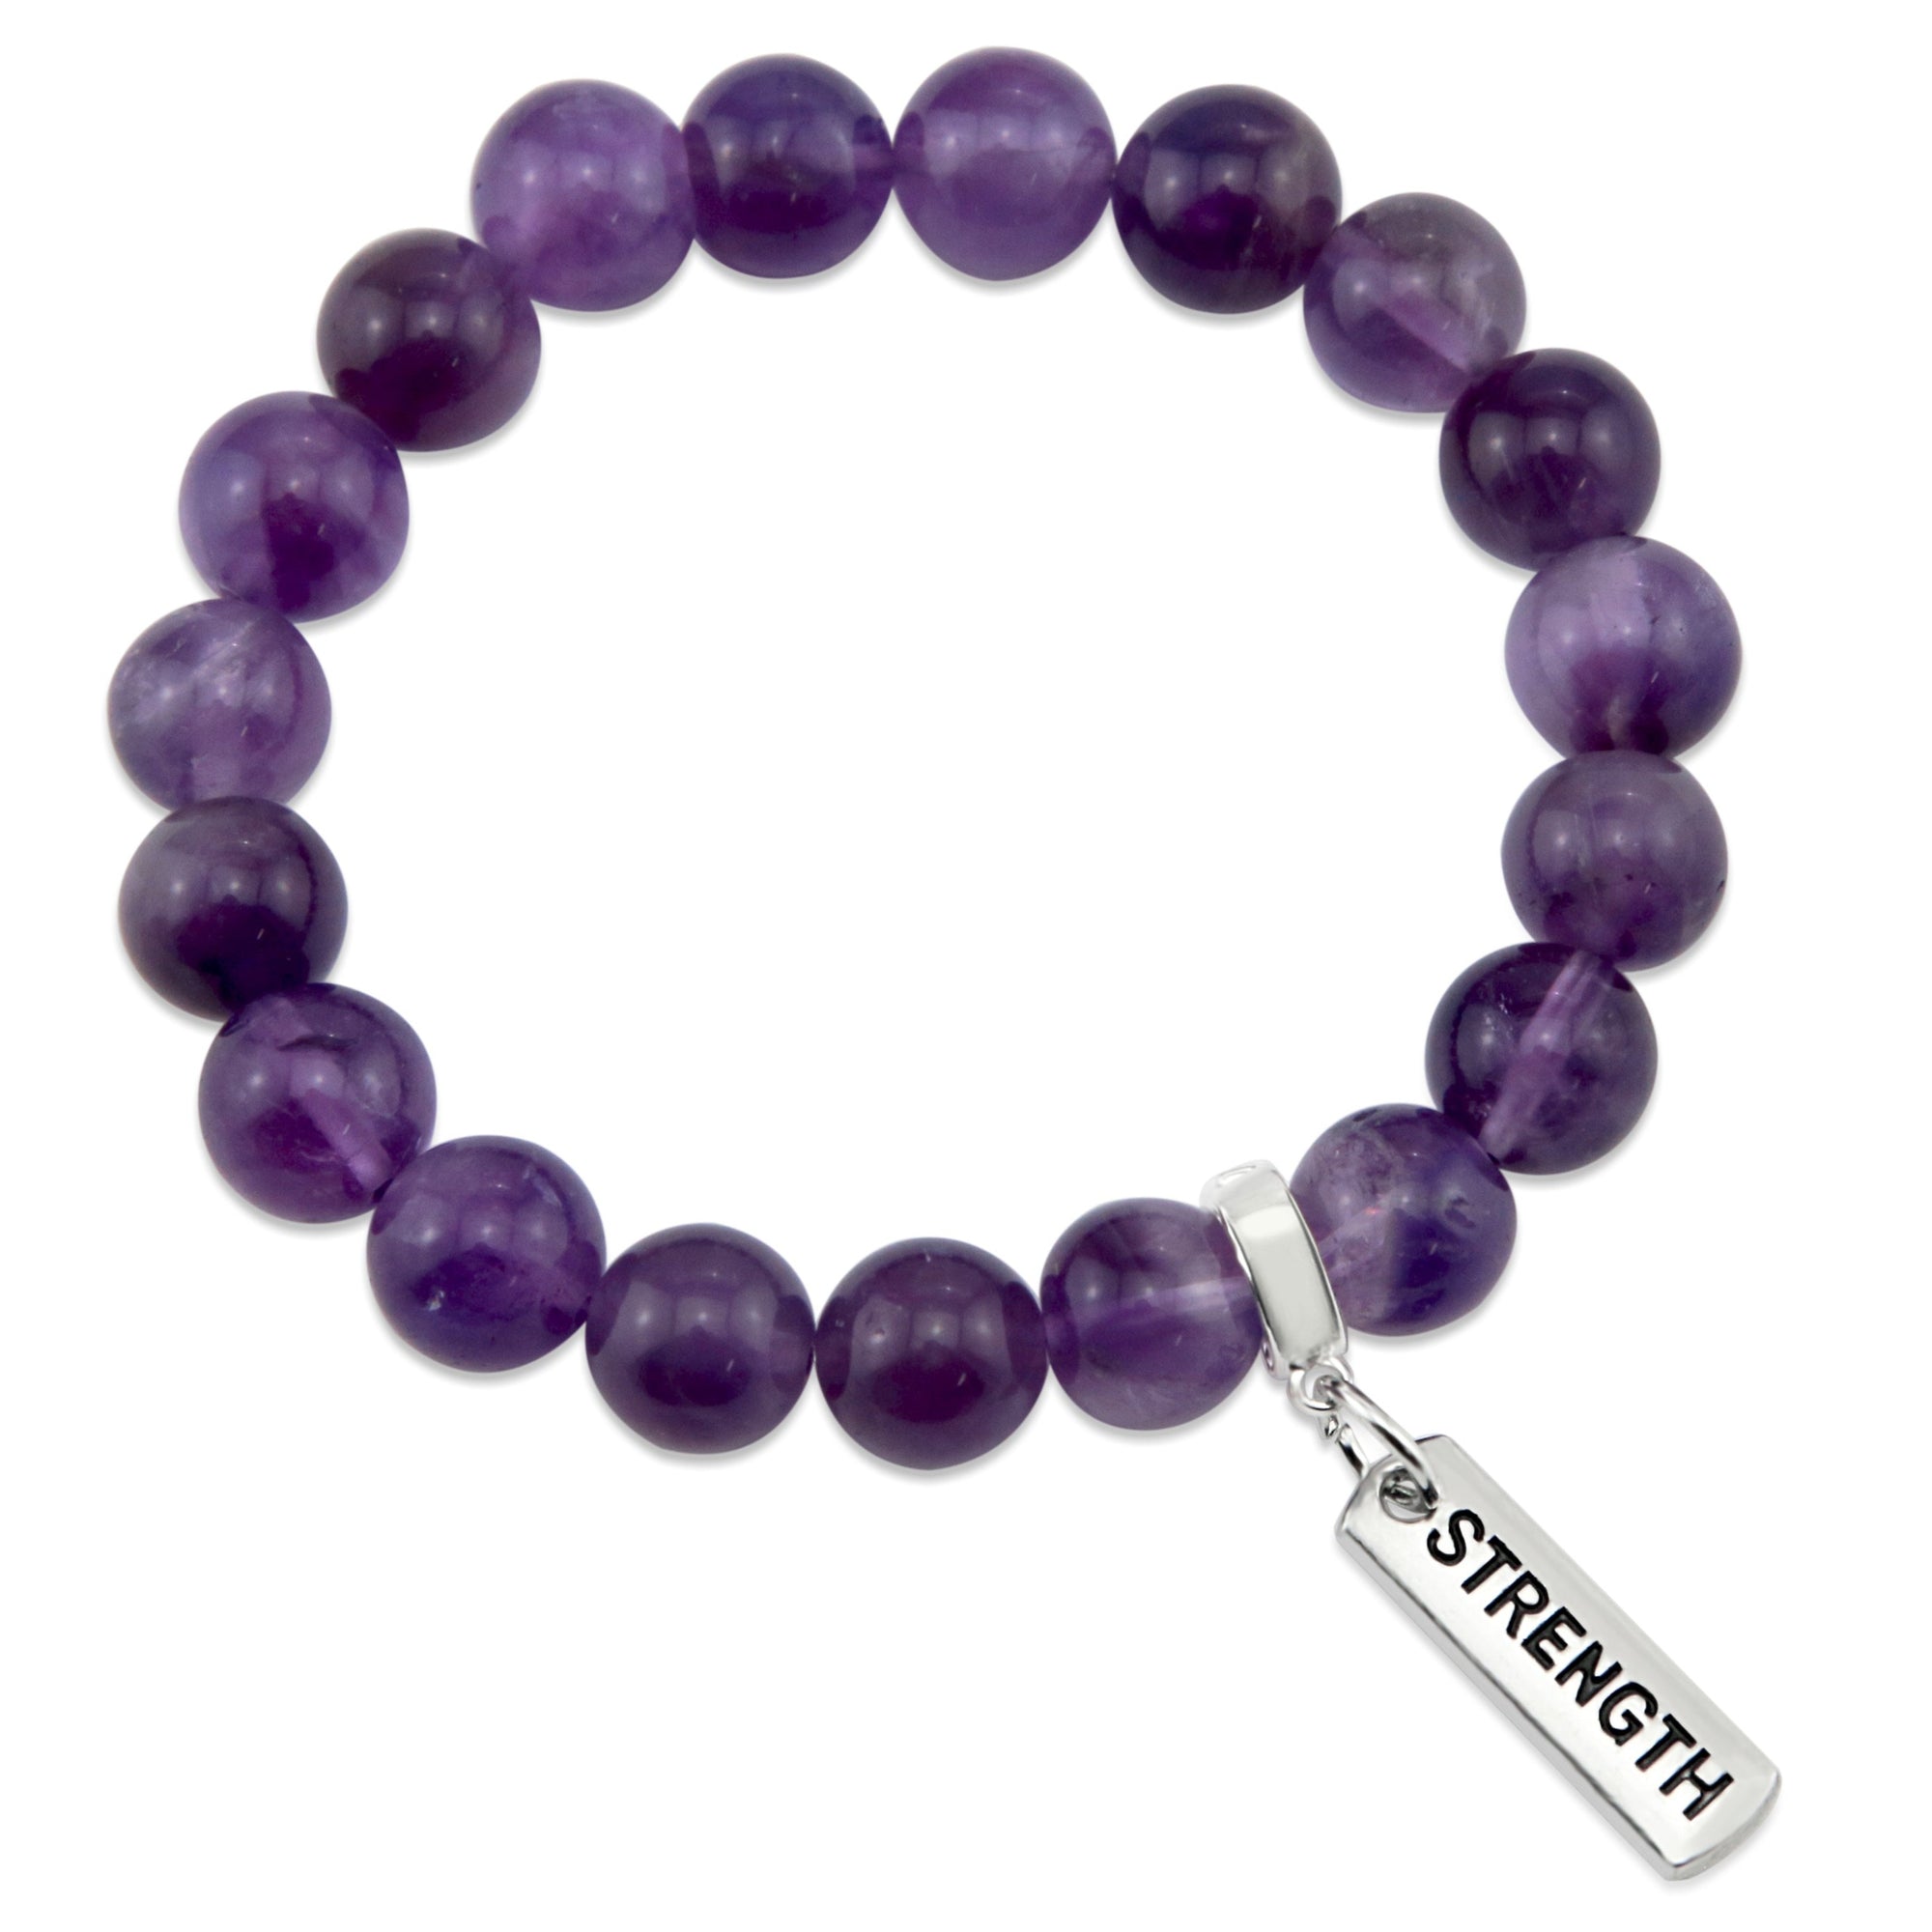 Amethyst stone bead bracelet with charm featuring the word strength and silver clip. 